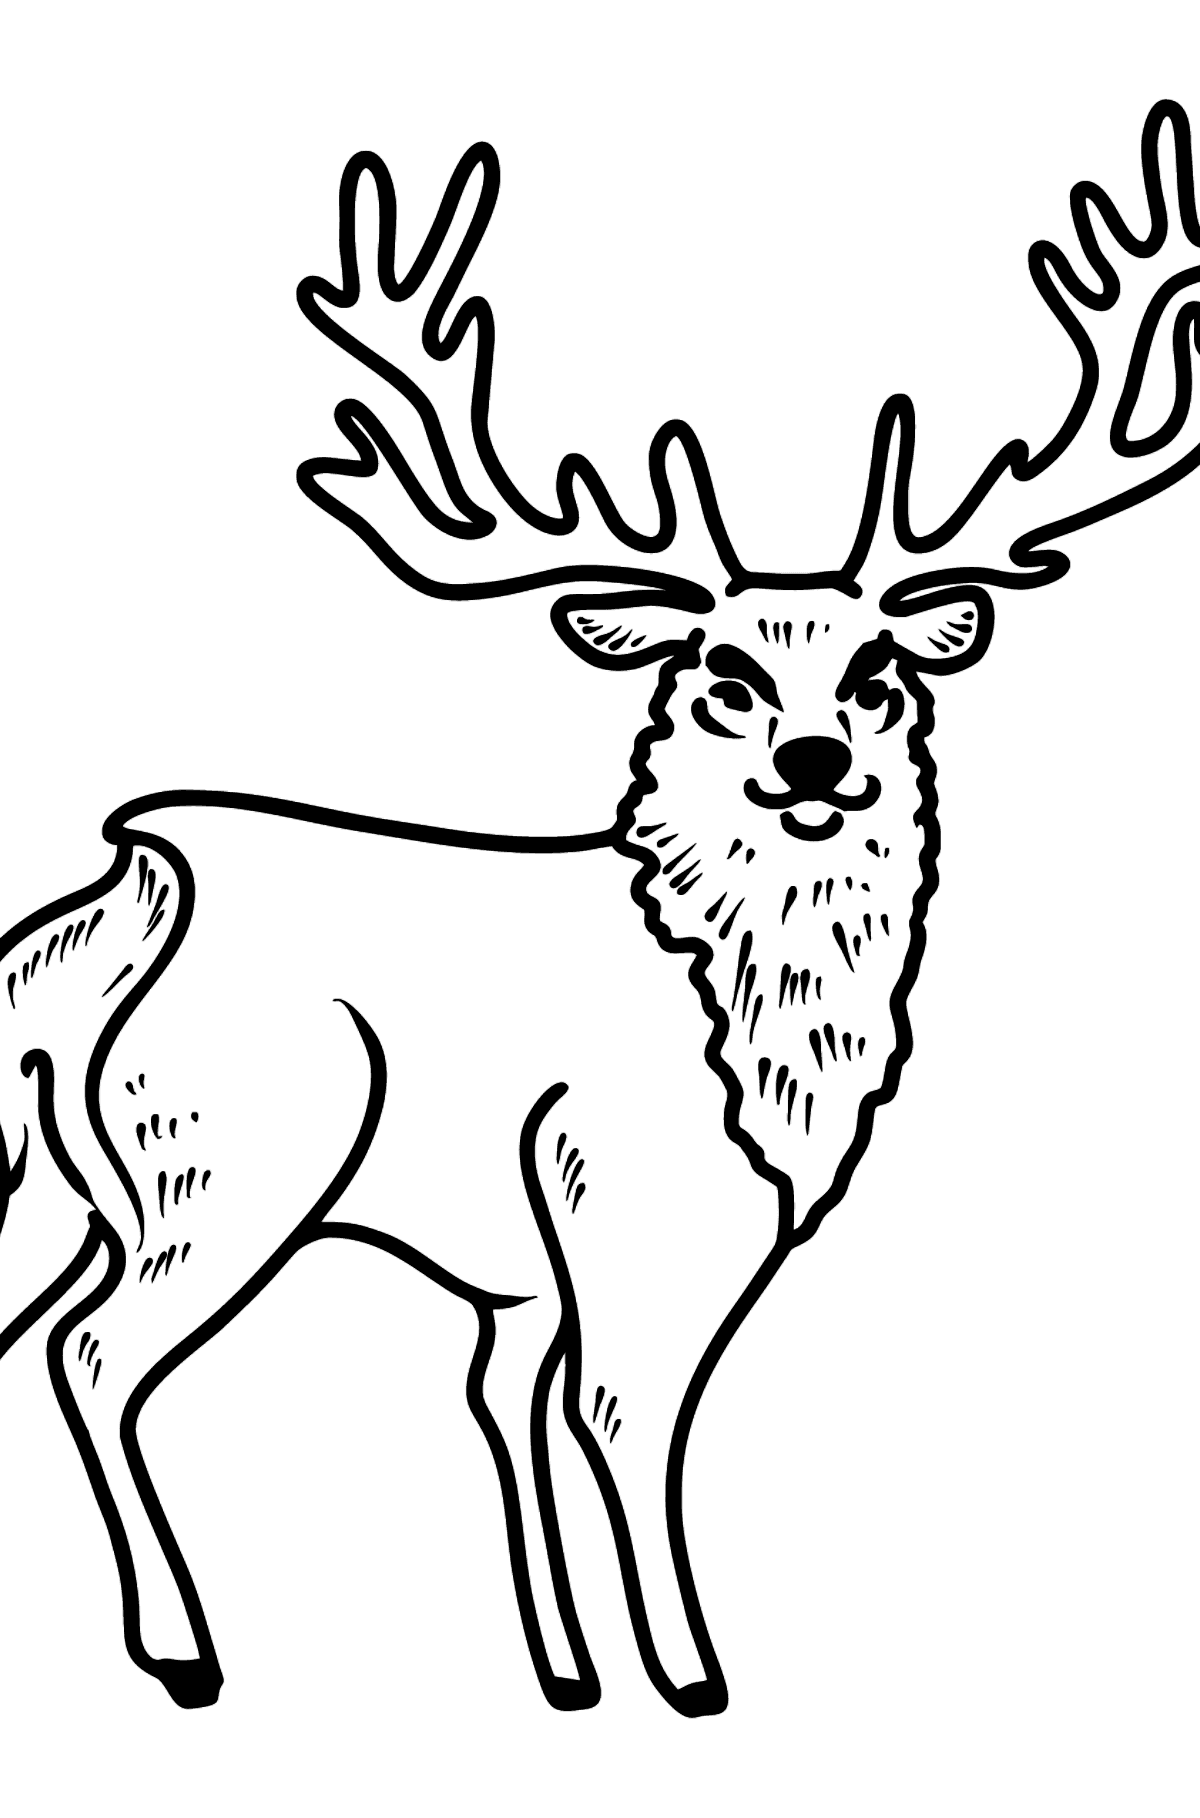 Deer coloring page - Coloring Pages for Kids